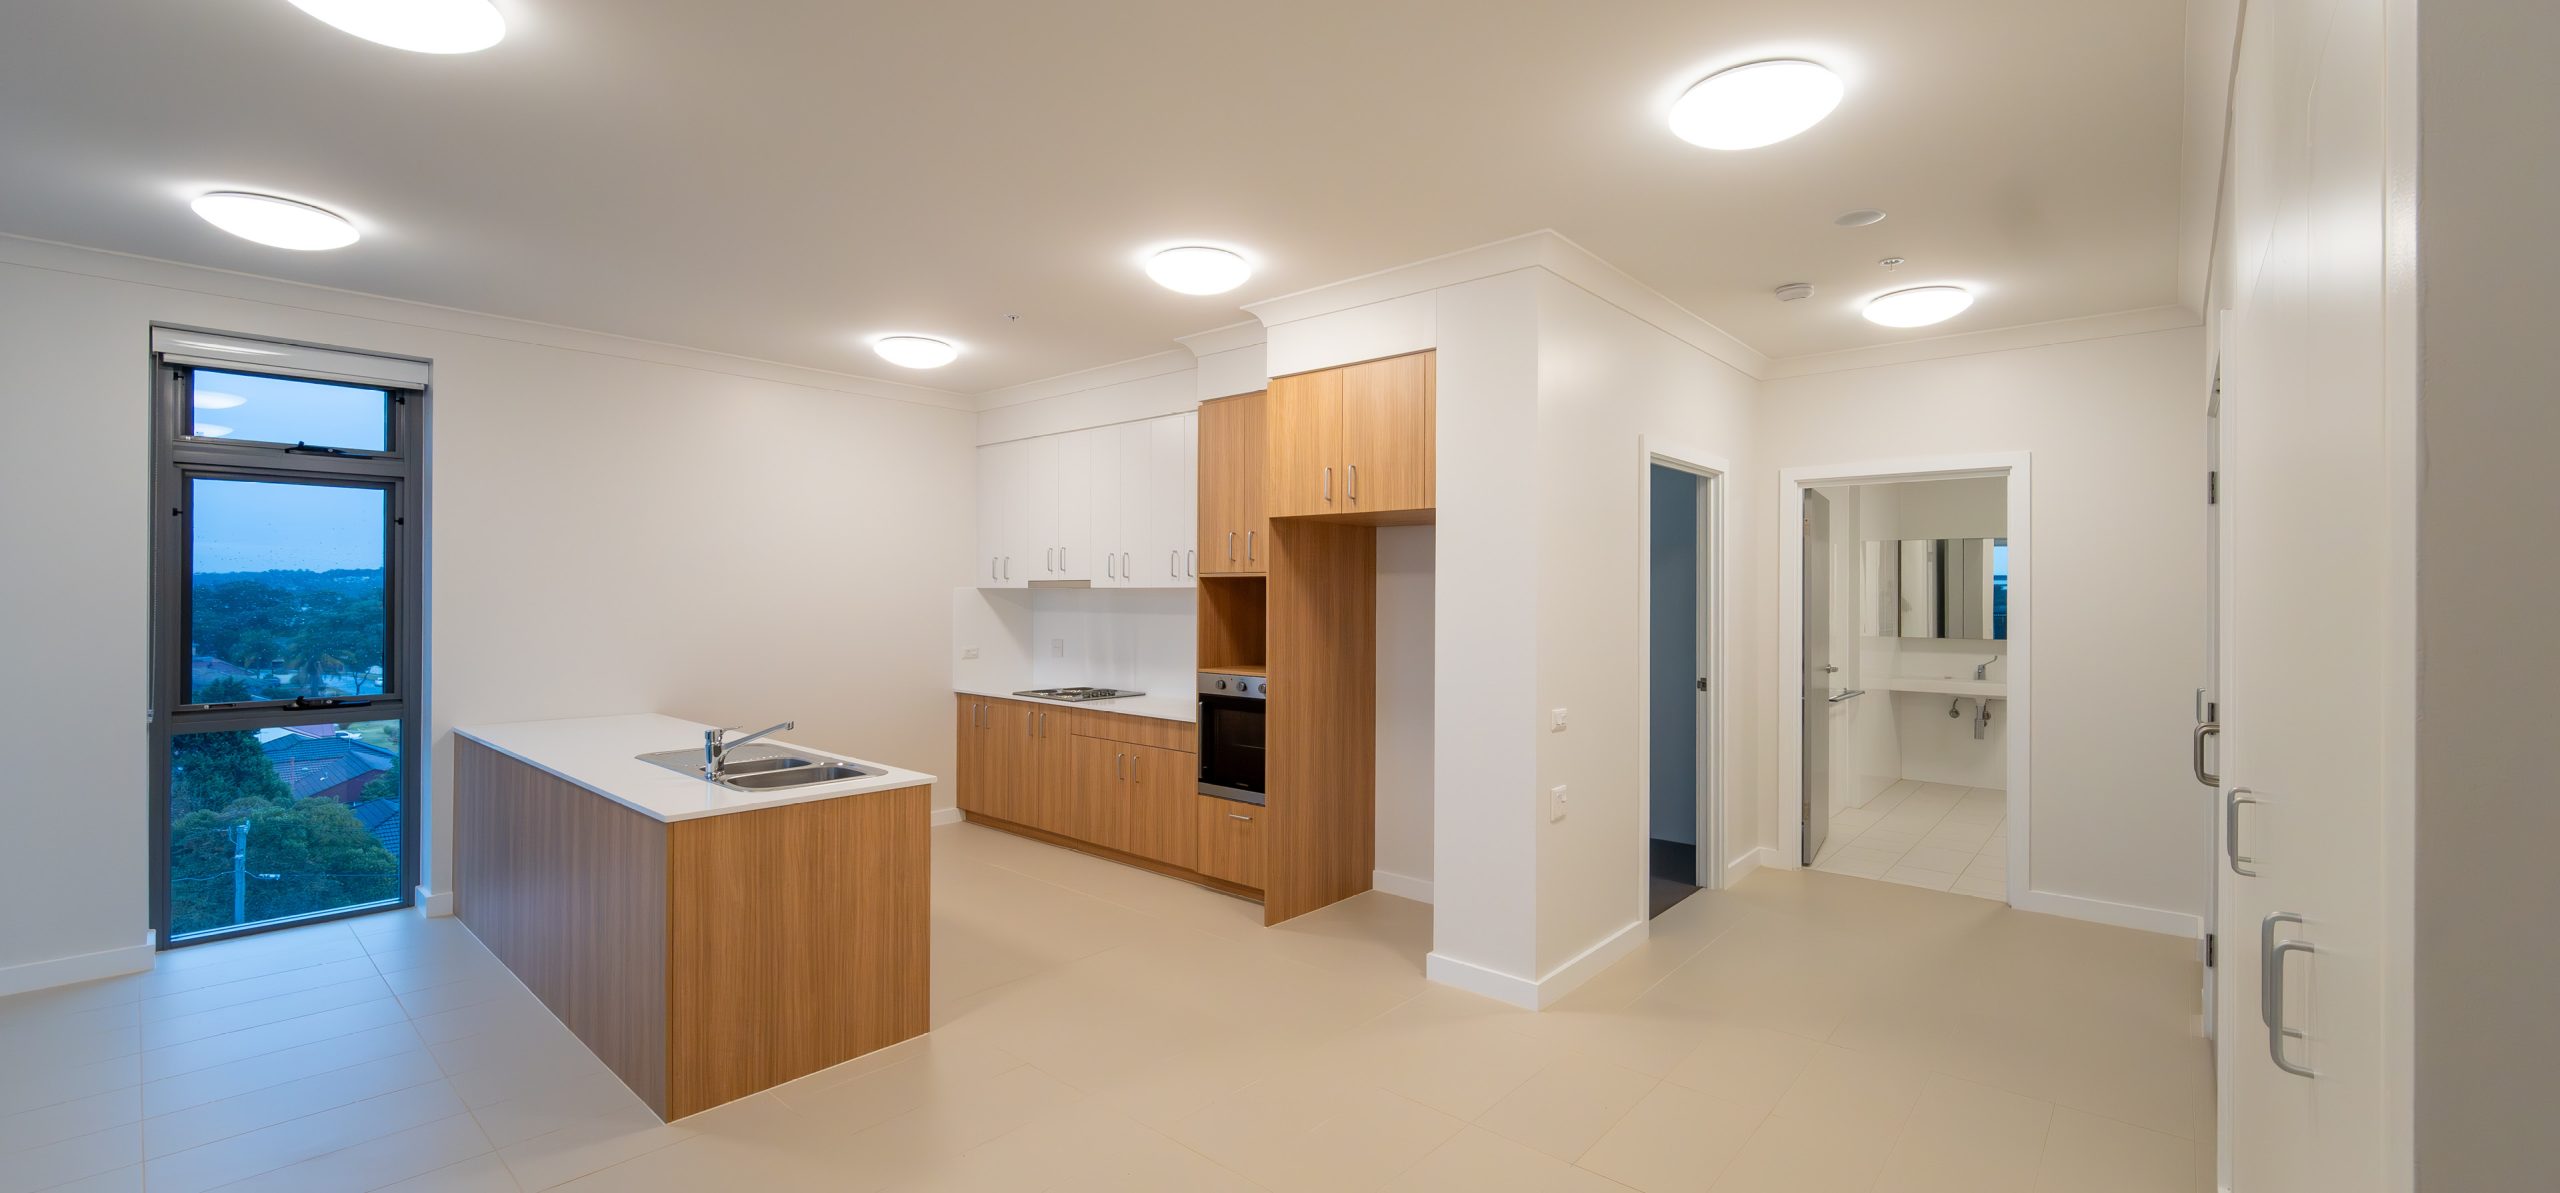 15 lahc warwick farm taylor construction new build residential interior kitchen hall